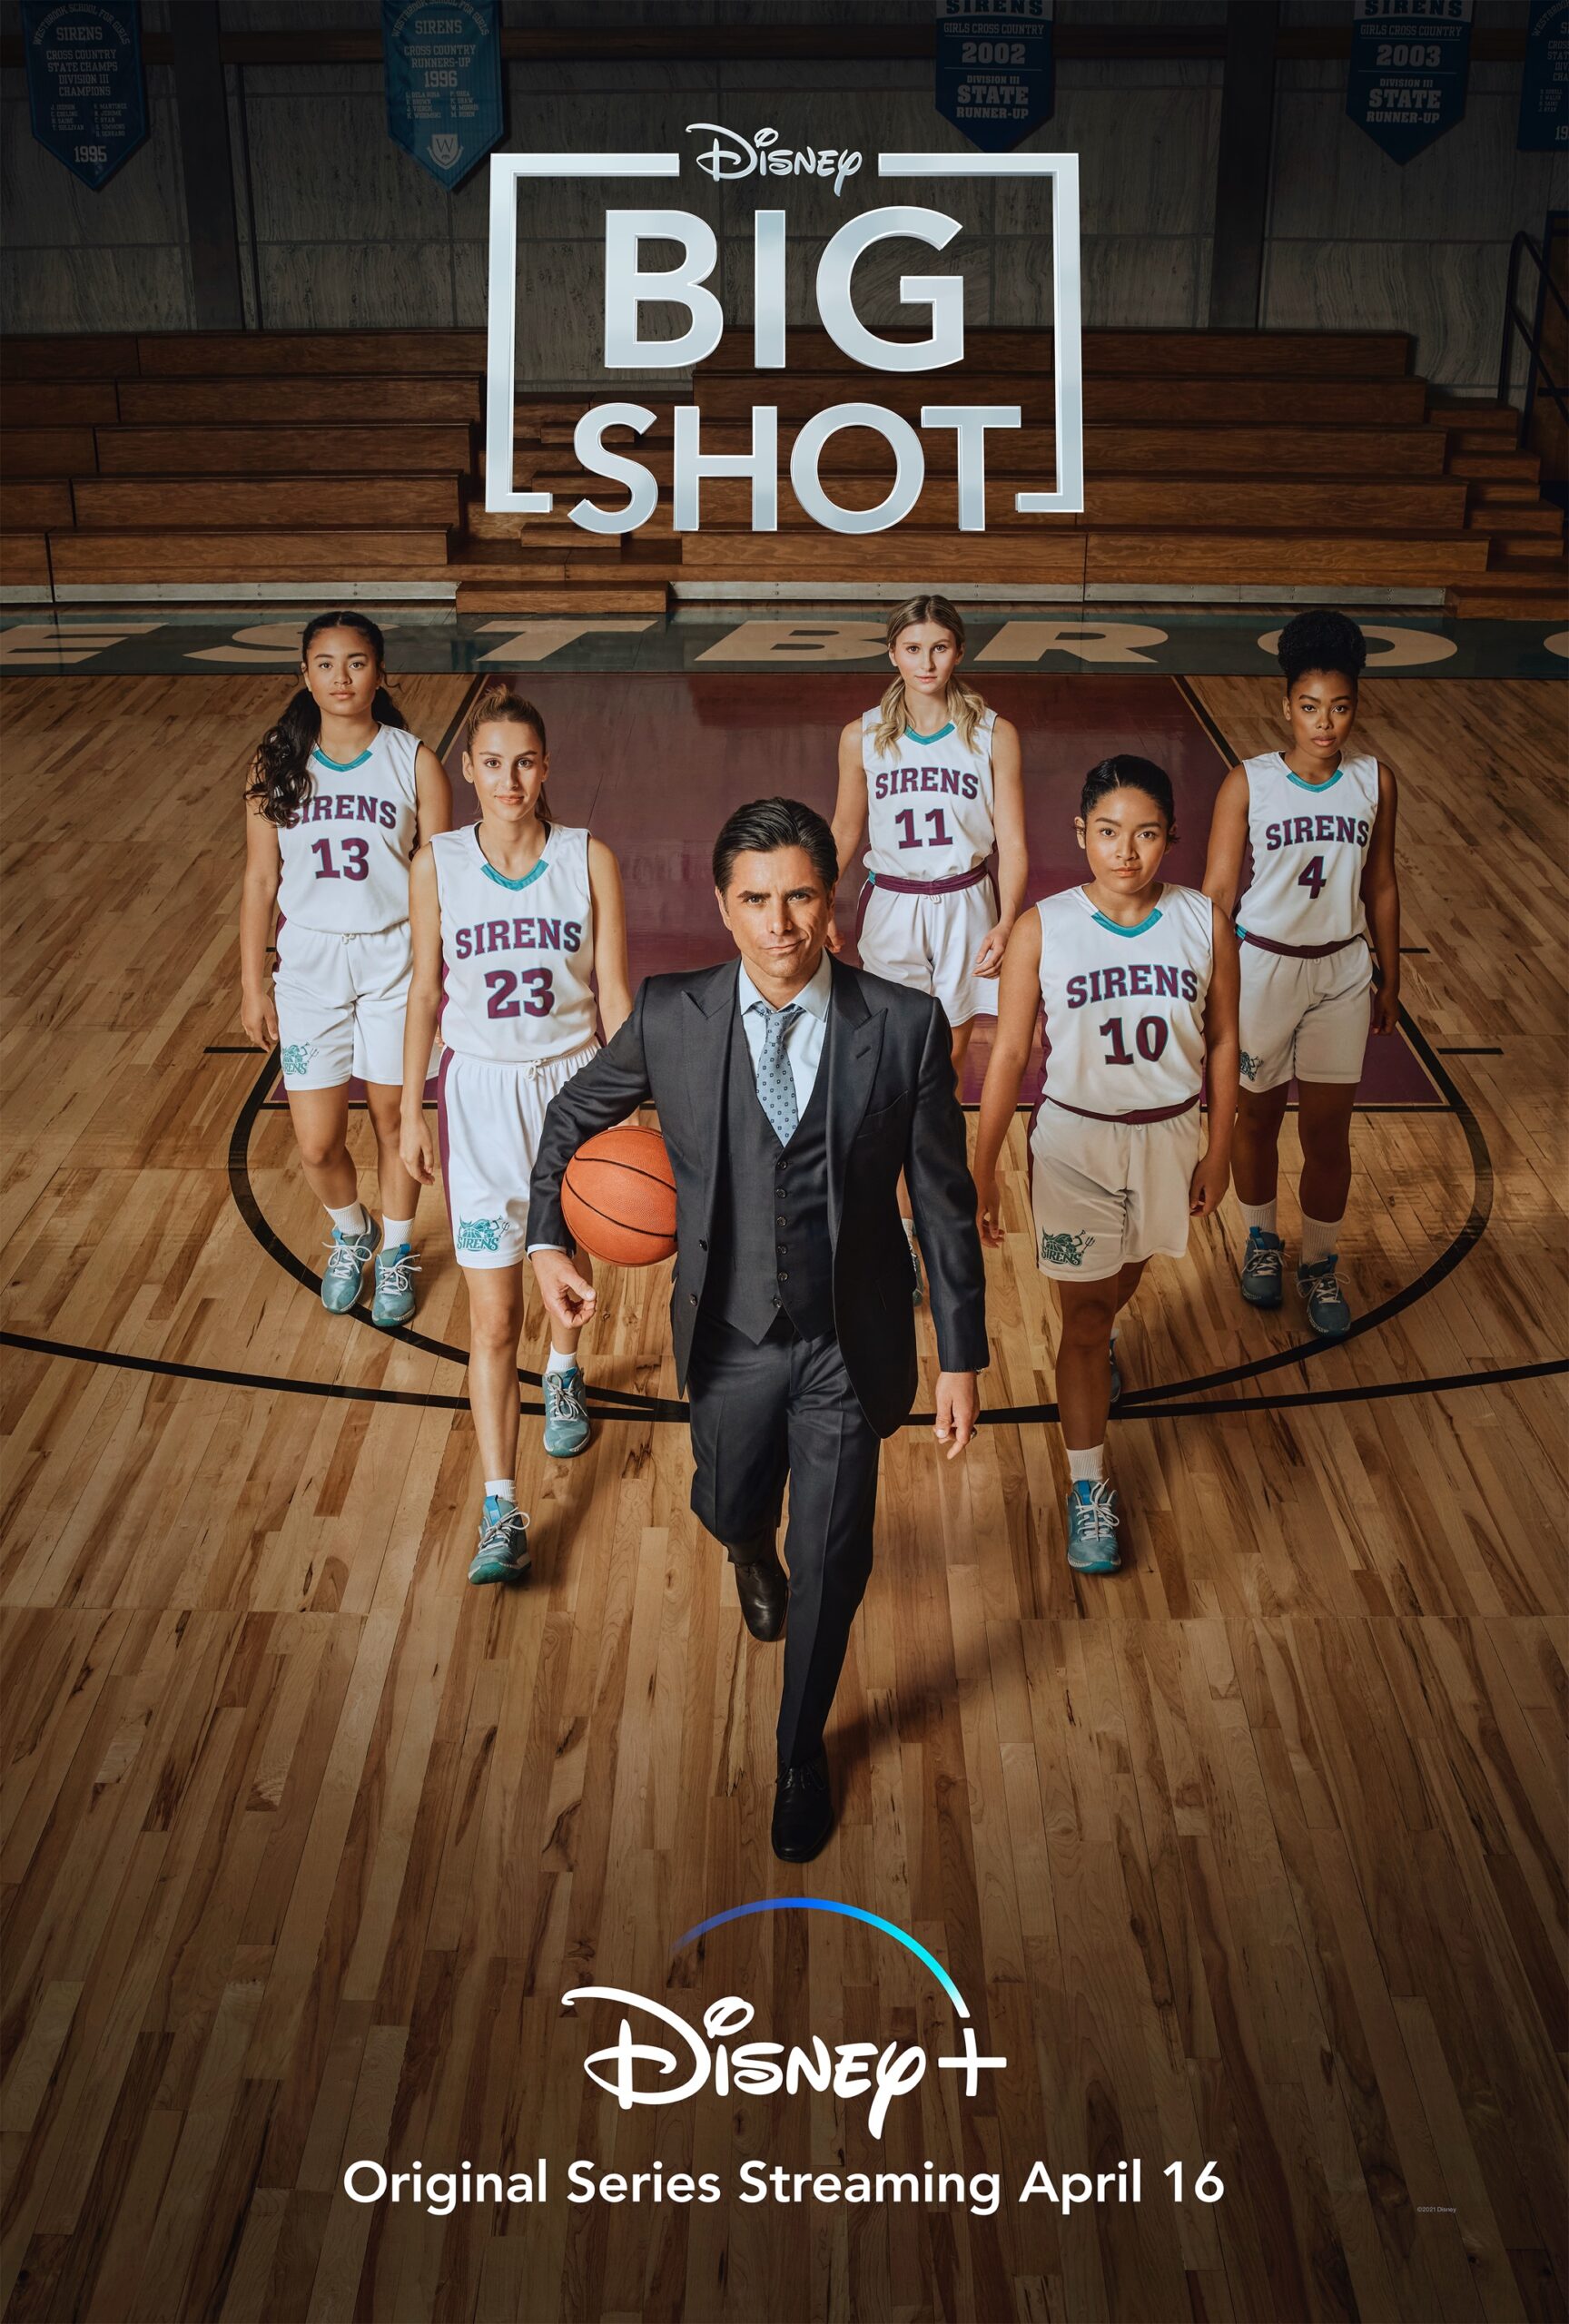 First Trailer for Big Shot with John Stamos coming to Disney+!